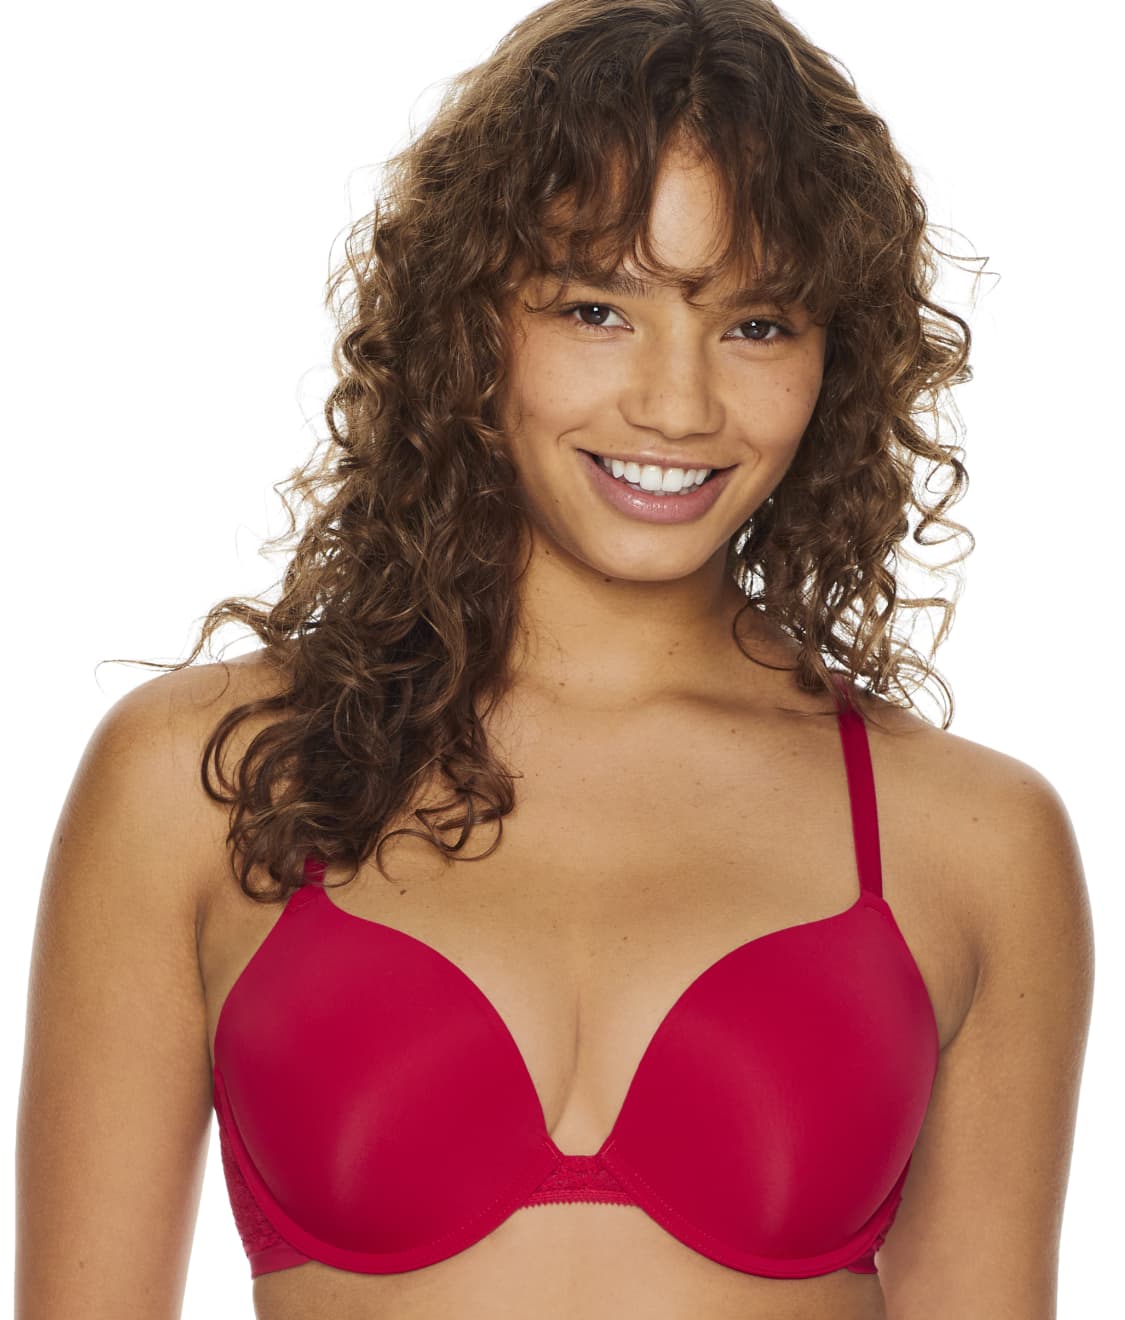 On Gossamer Sleek Micro Underwire Push Up Bra (More colors available) -  G9200